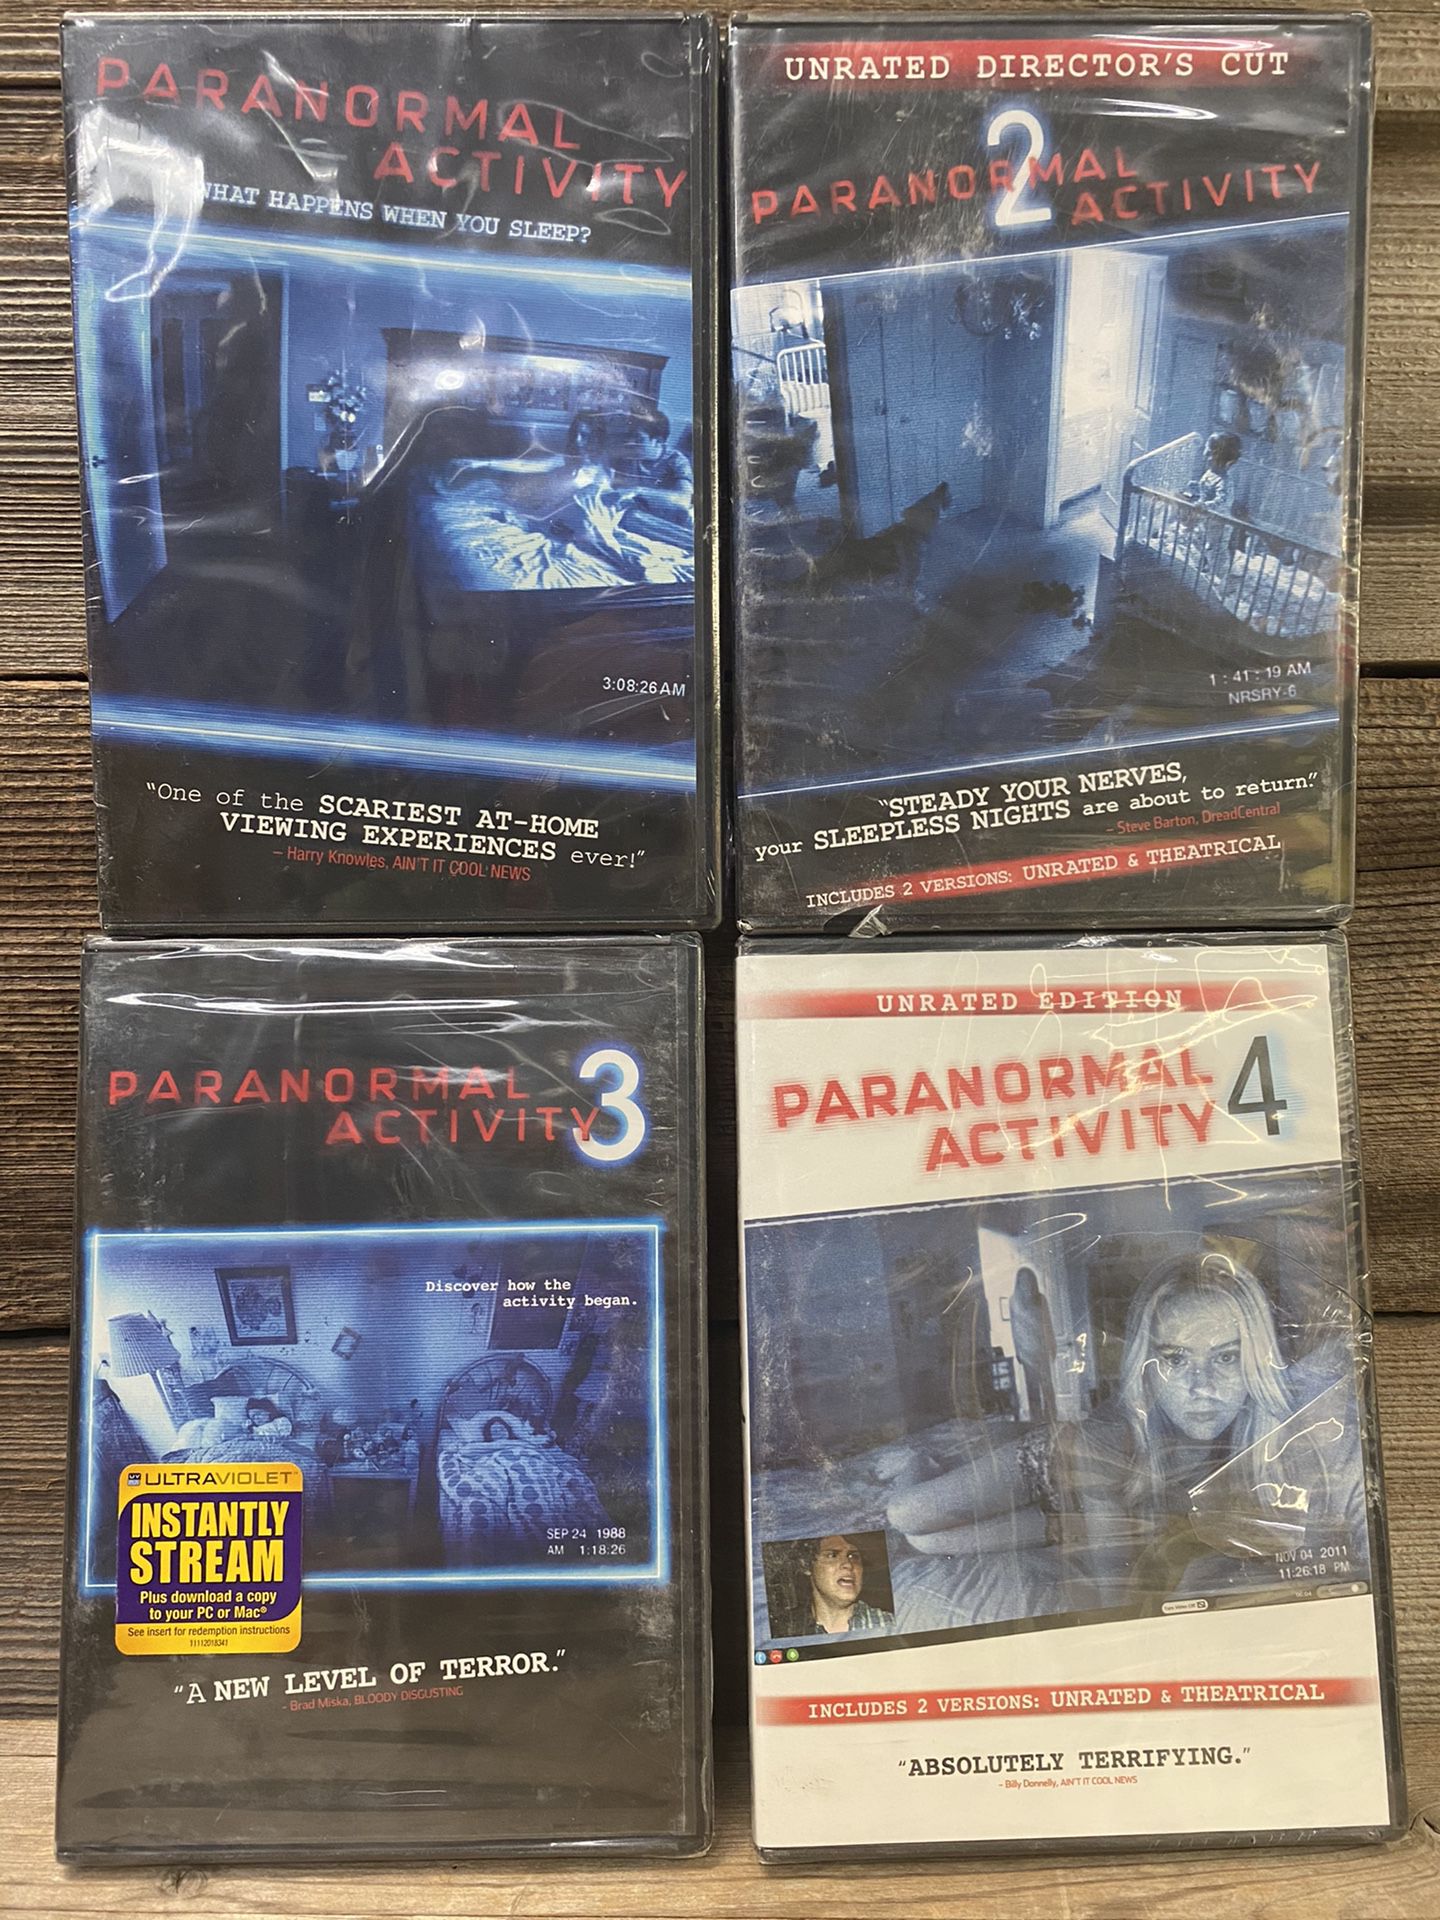 PARANORMAL ACTIVITY DVDs #1-4 - New and sealed